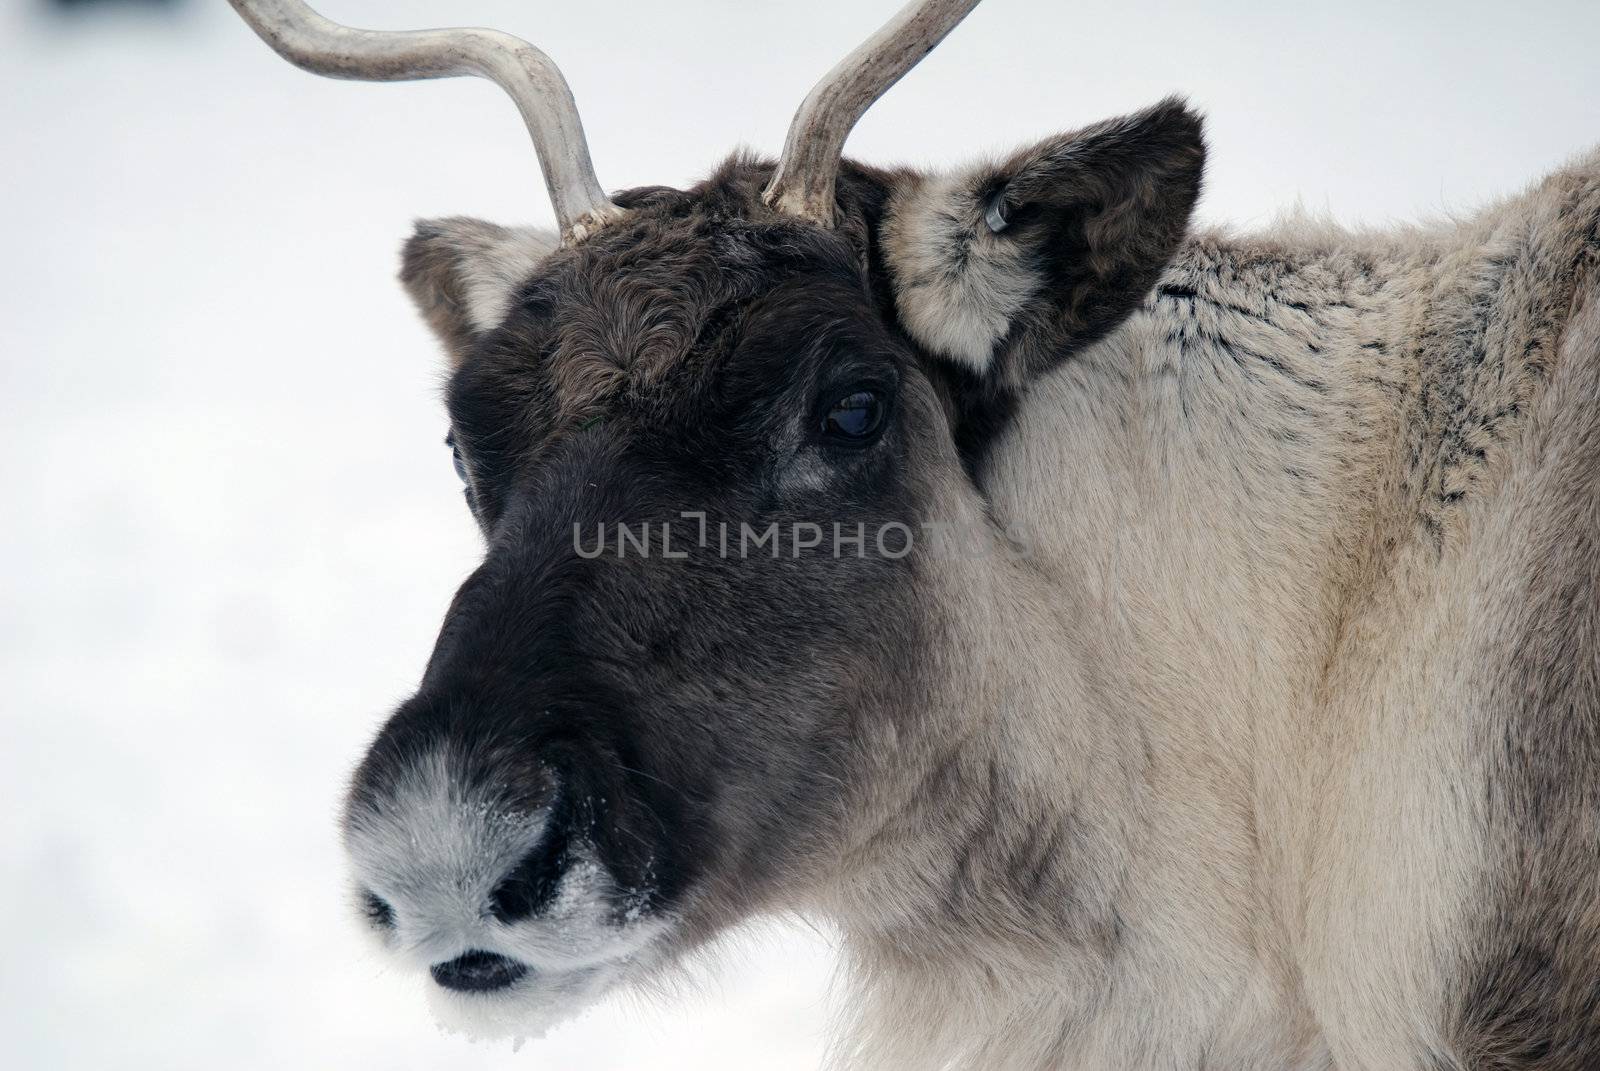 Close-up portrait of a reindeer on a cold Winter day